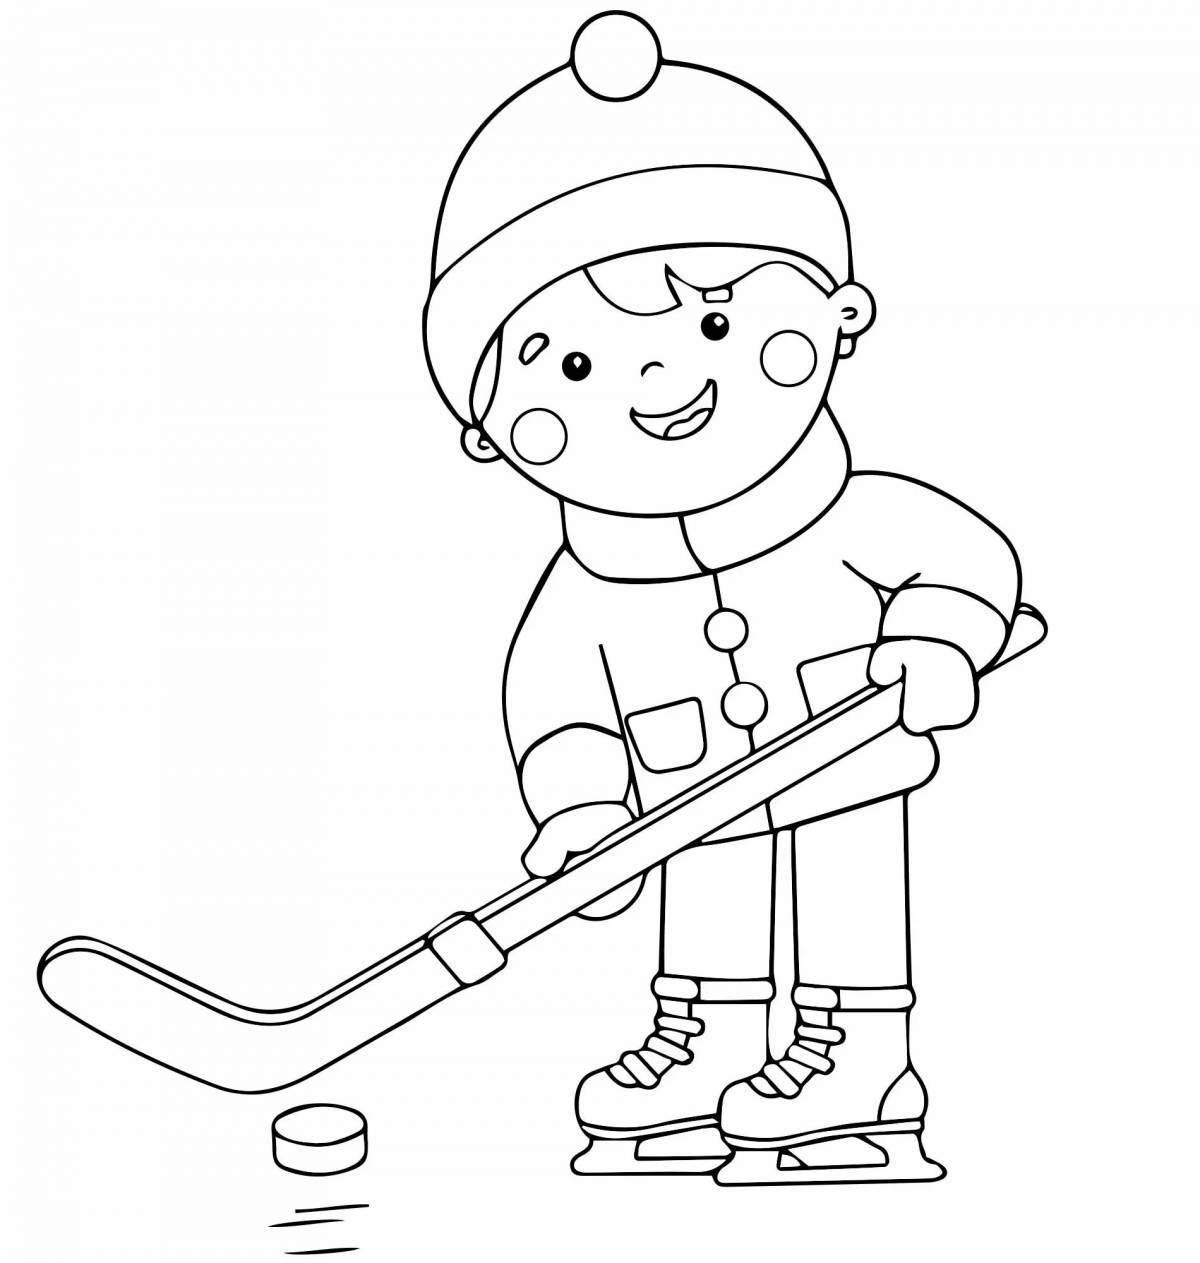 Animated coloring winter sports for preschoolers